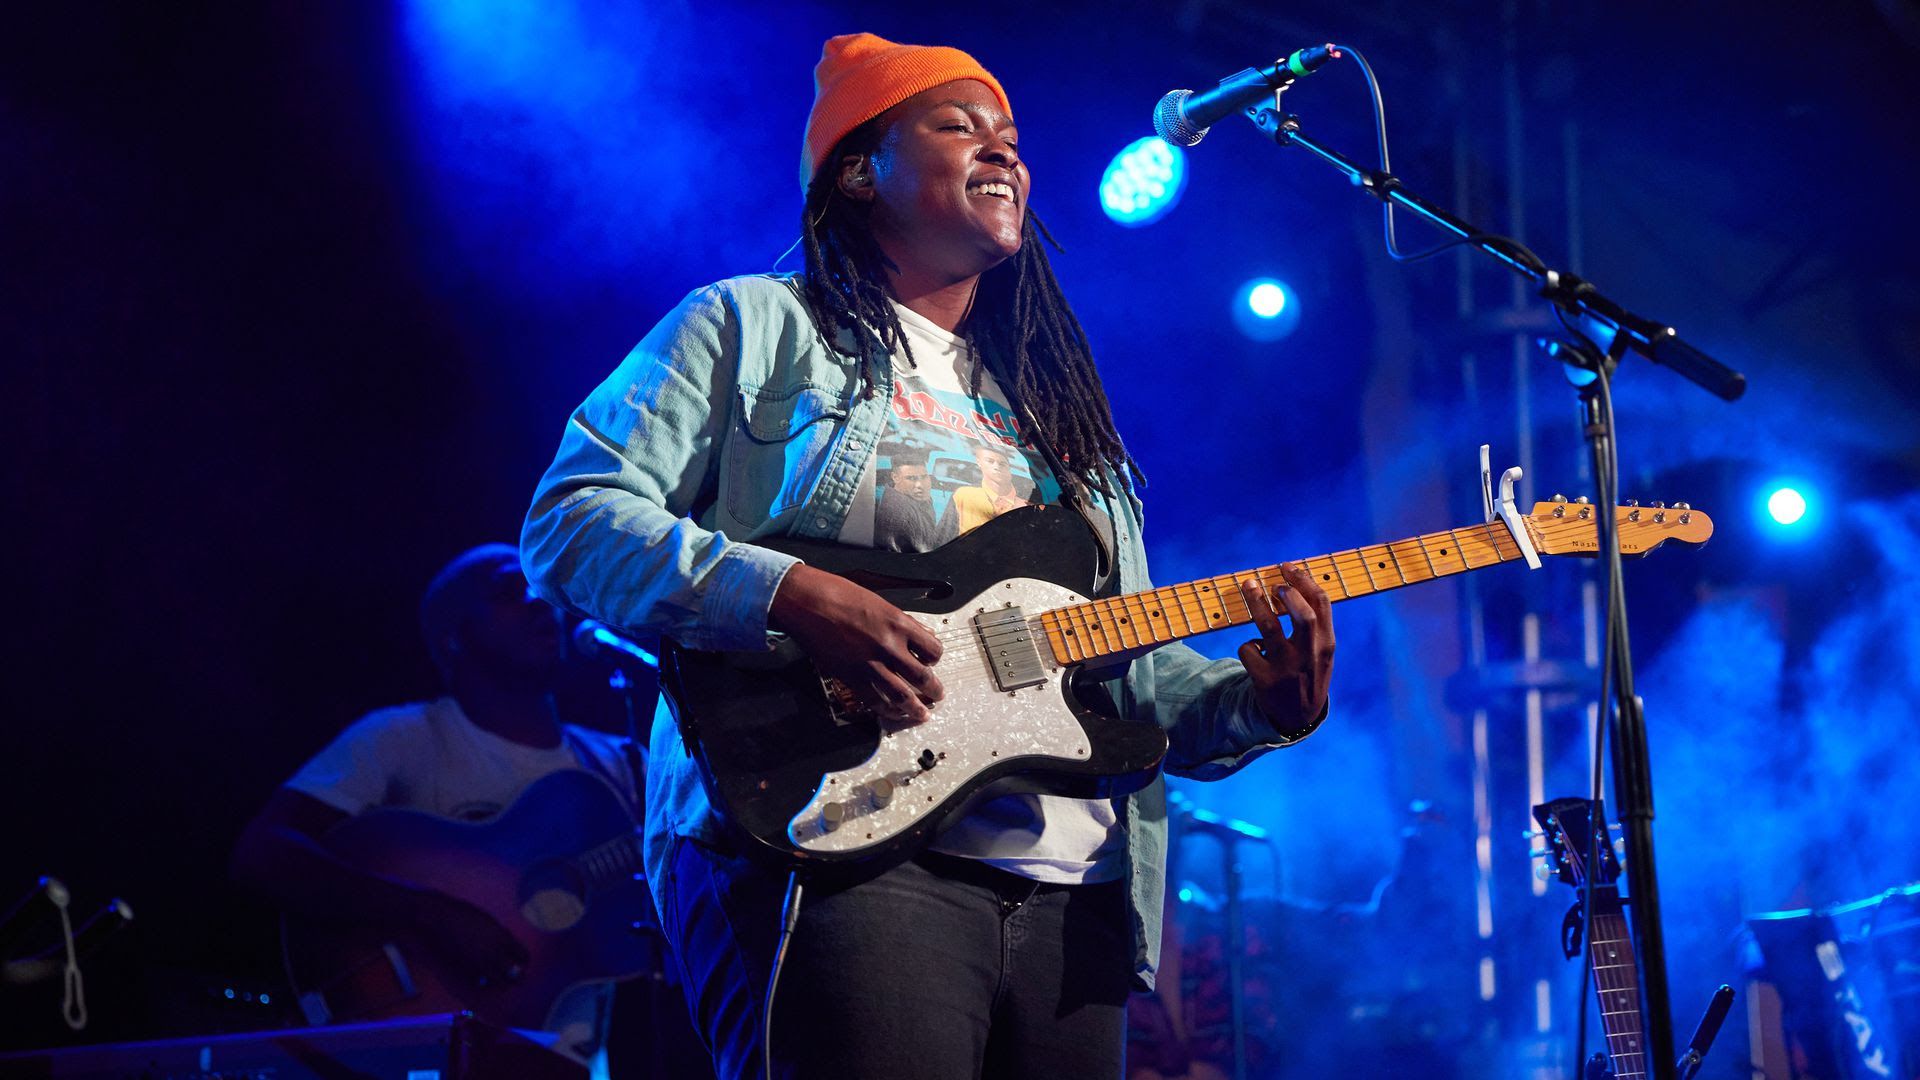 Joy Oladokun performs at 3rd and Lindsley in June, 2021 holding a guitar.